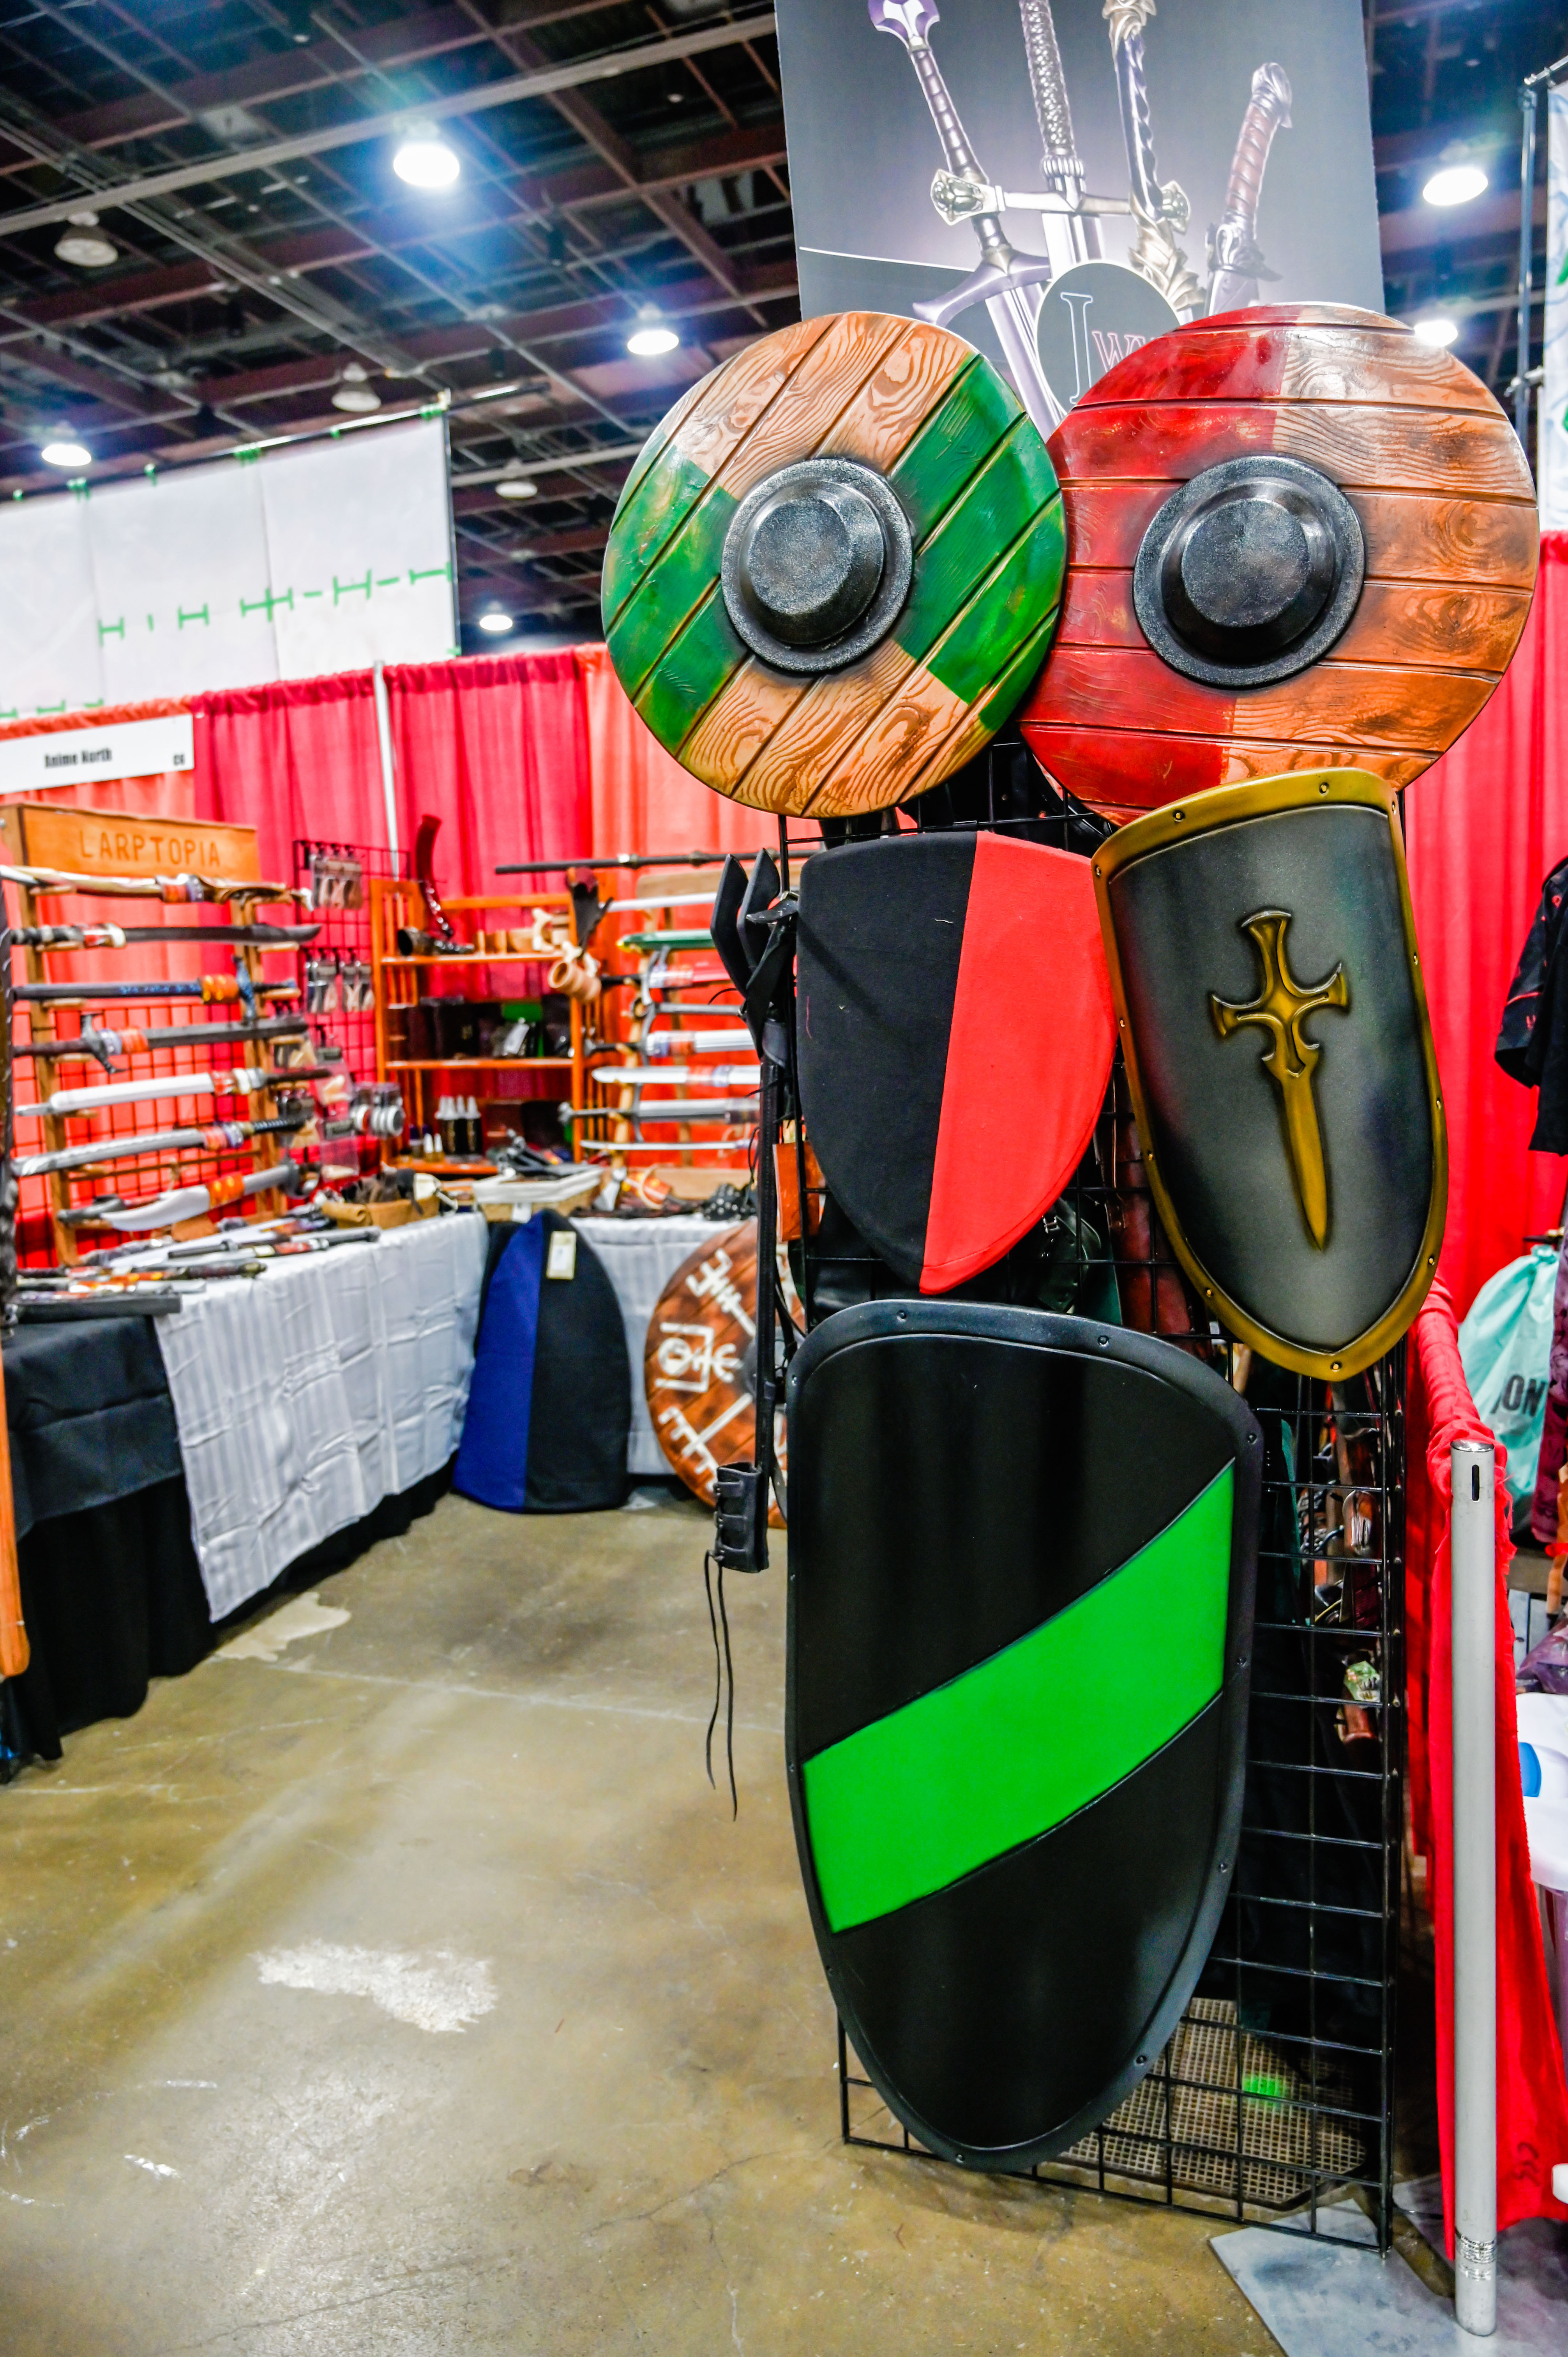 larptopia youmacon booth with foam shields, larp swords, and accessories